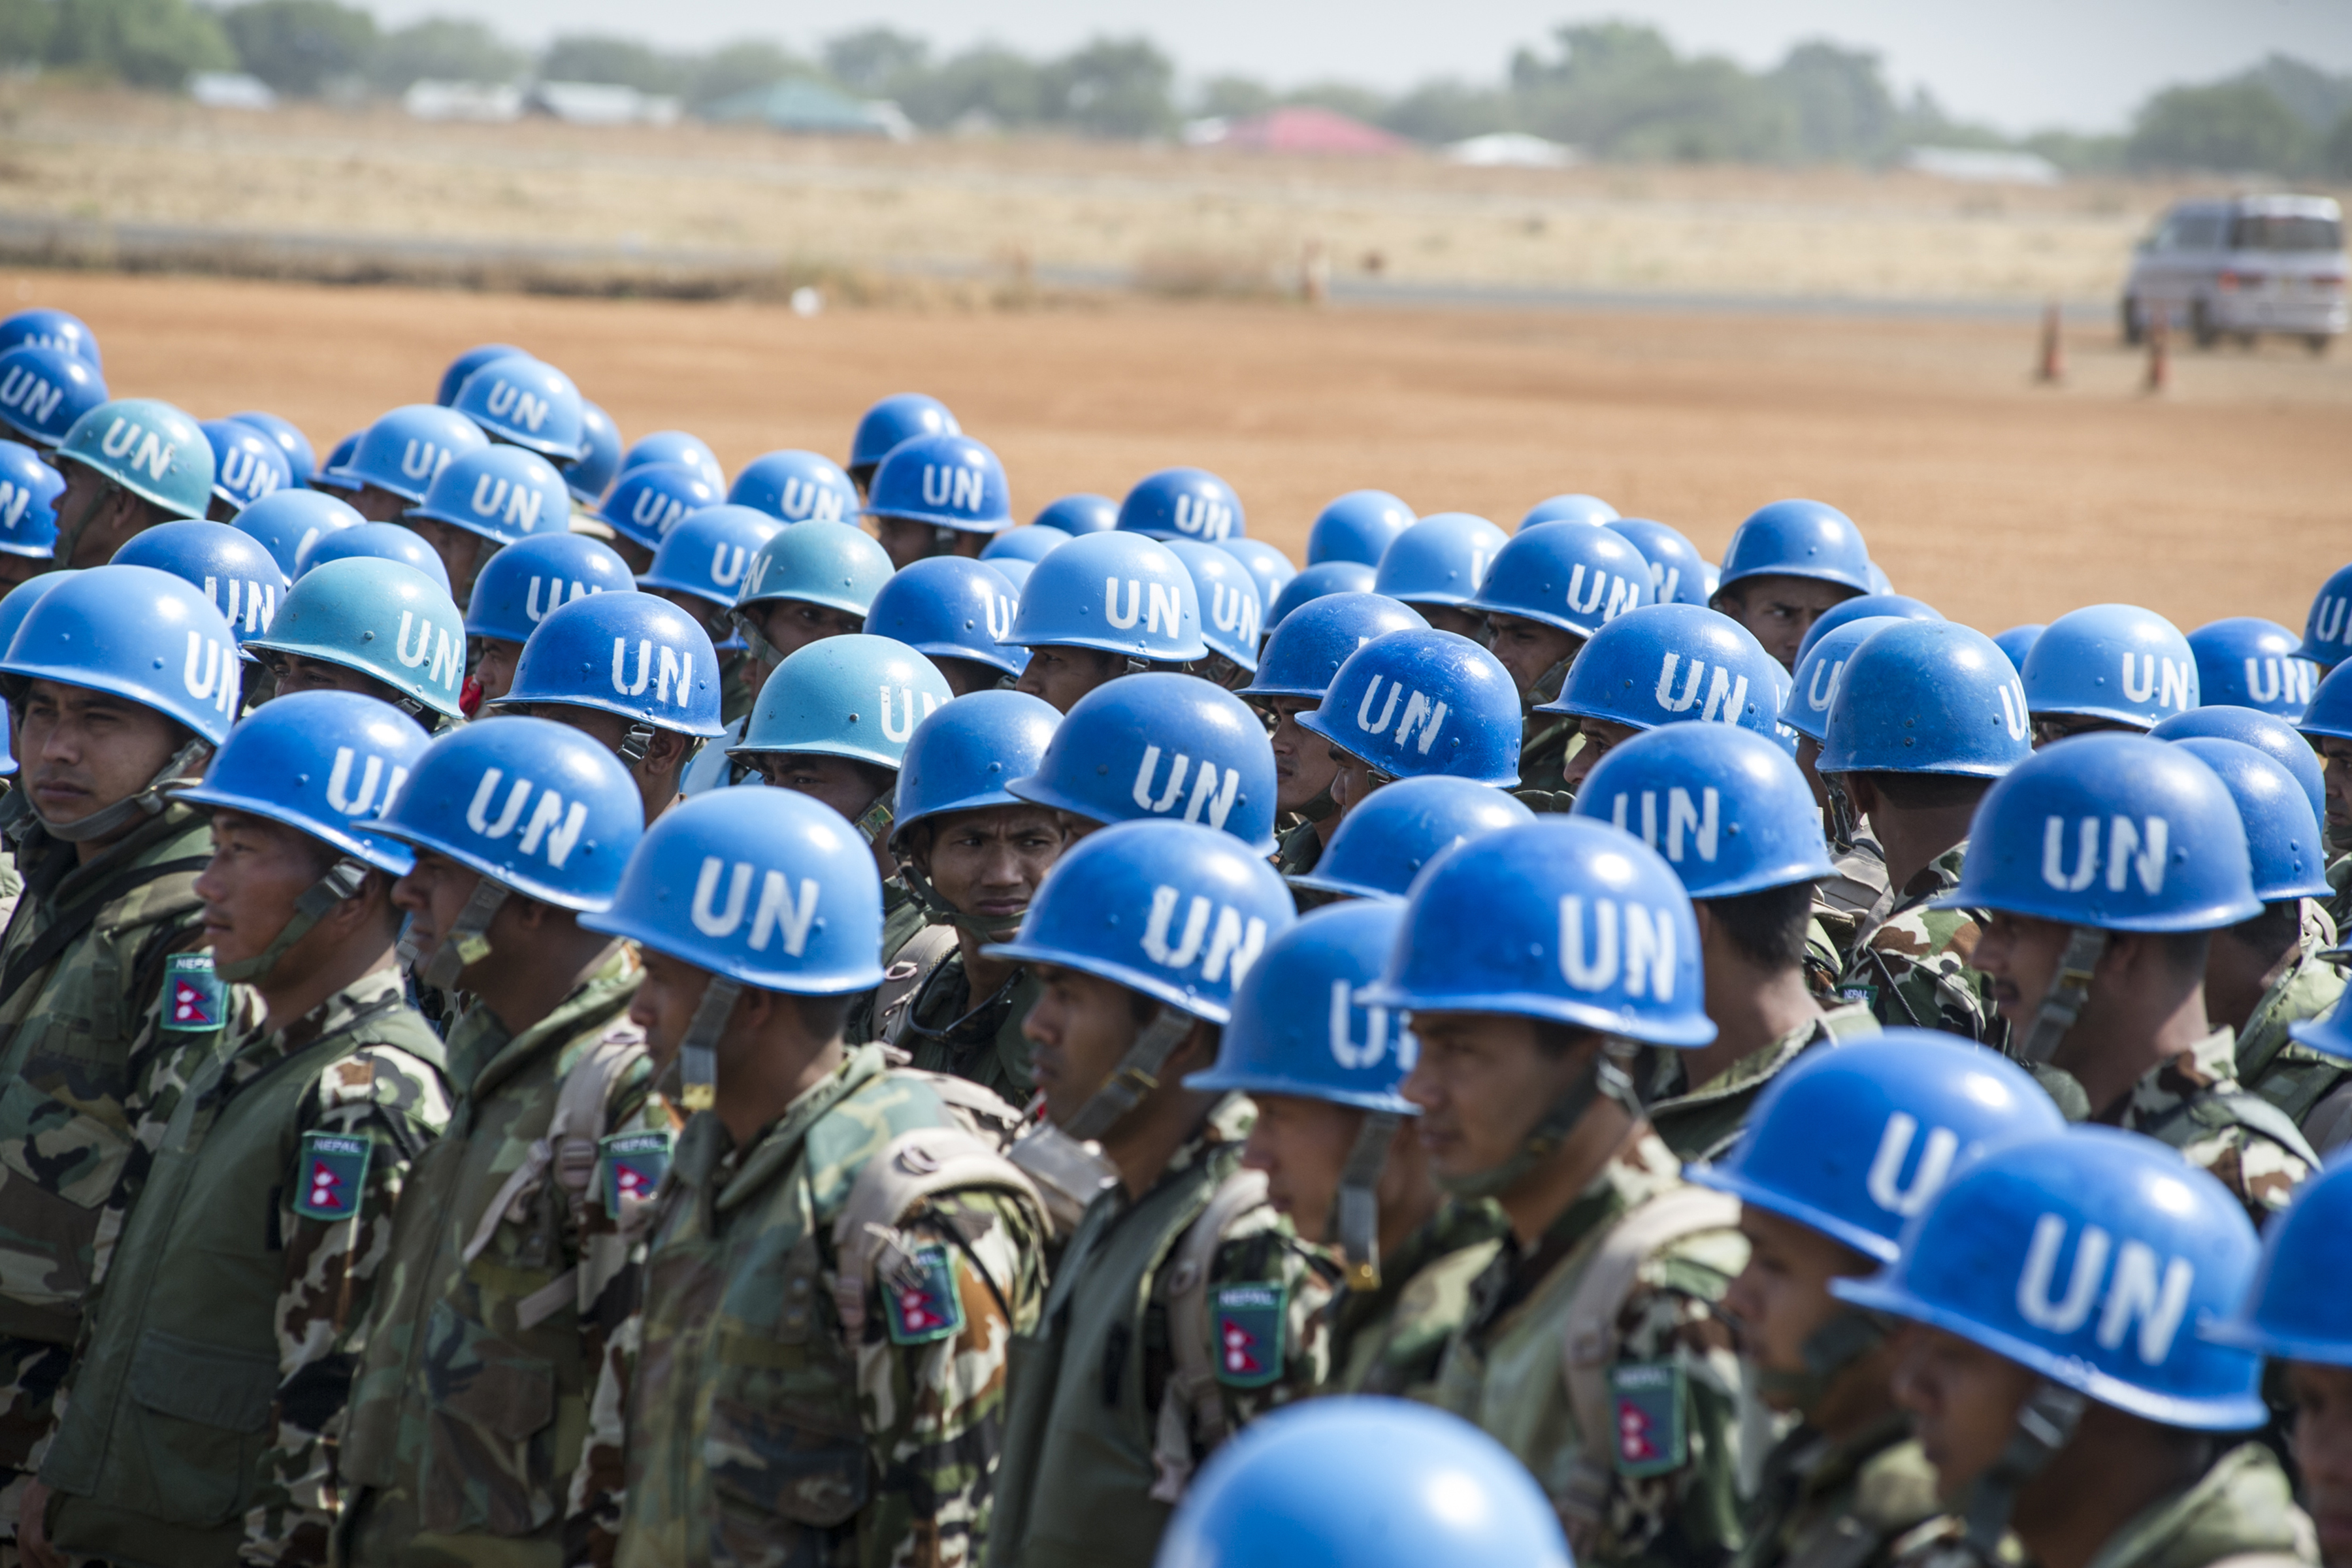 Nepal is now the third largest troops contributing country to UN Missions